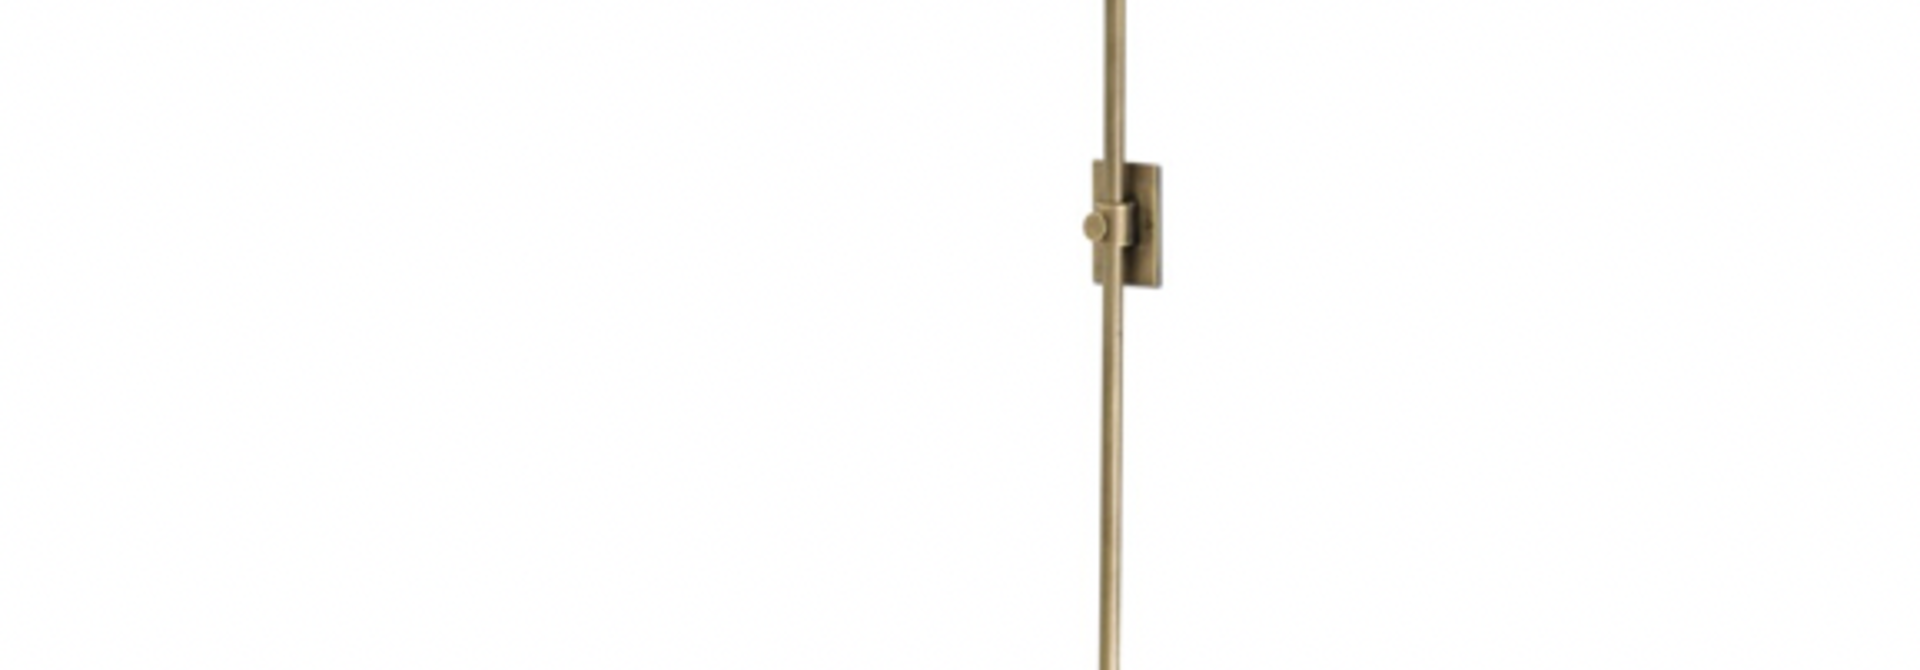 Overture | The Sconce Collection, Antique Brass - 8 Inch x 18.25 Inch x 36.25 Inch